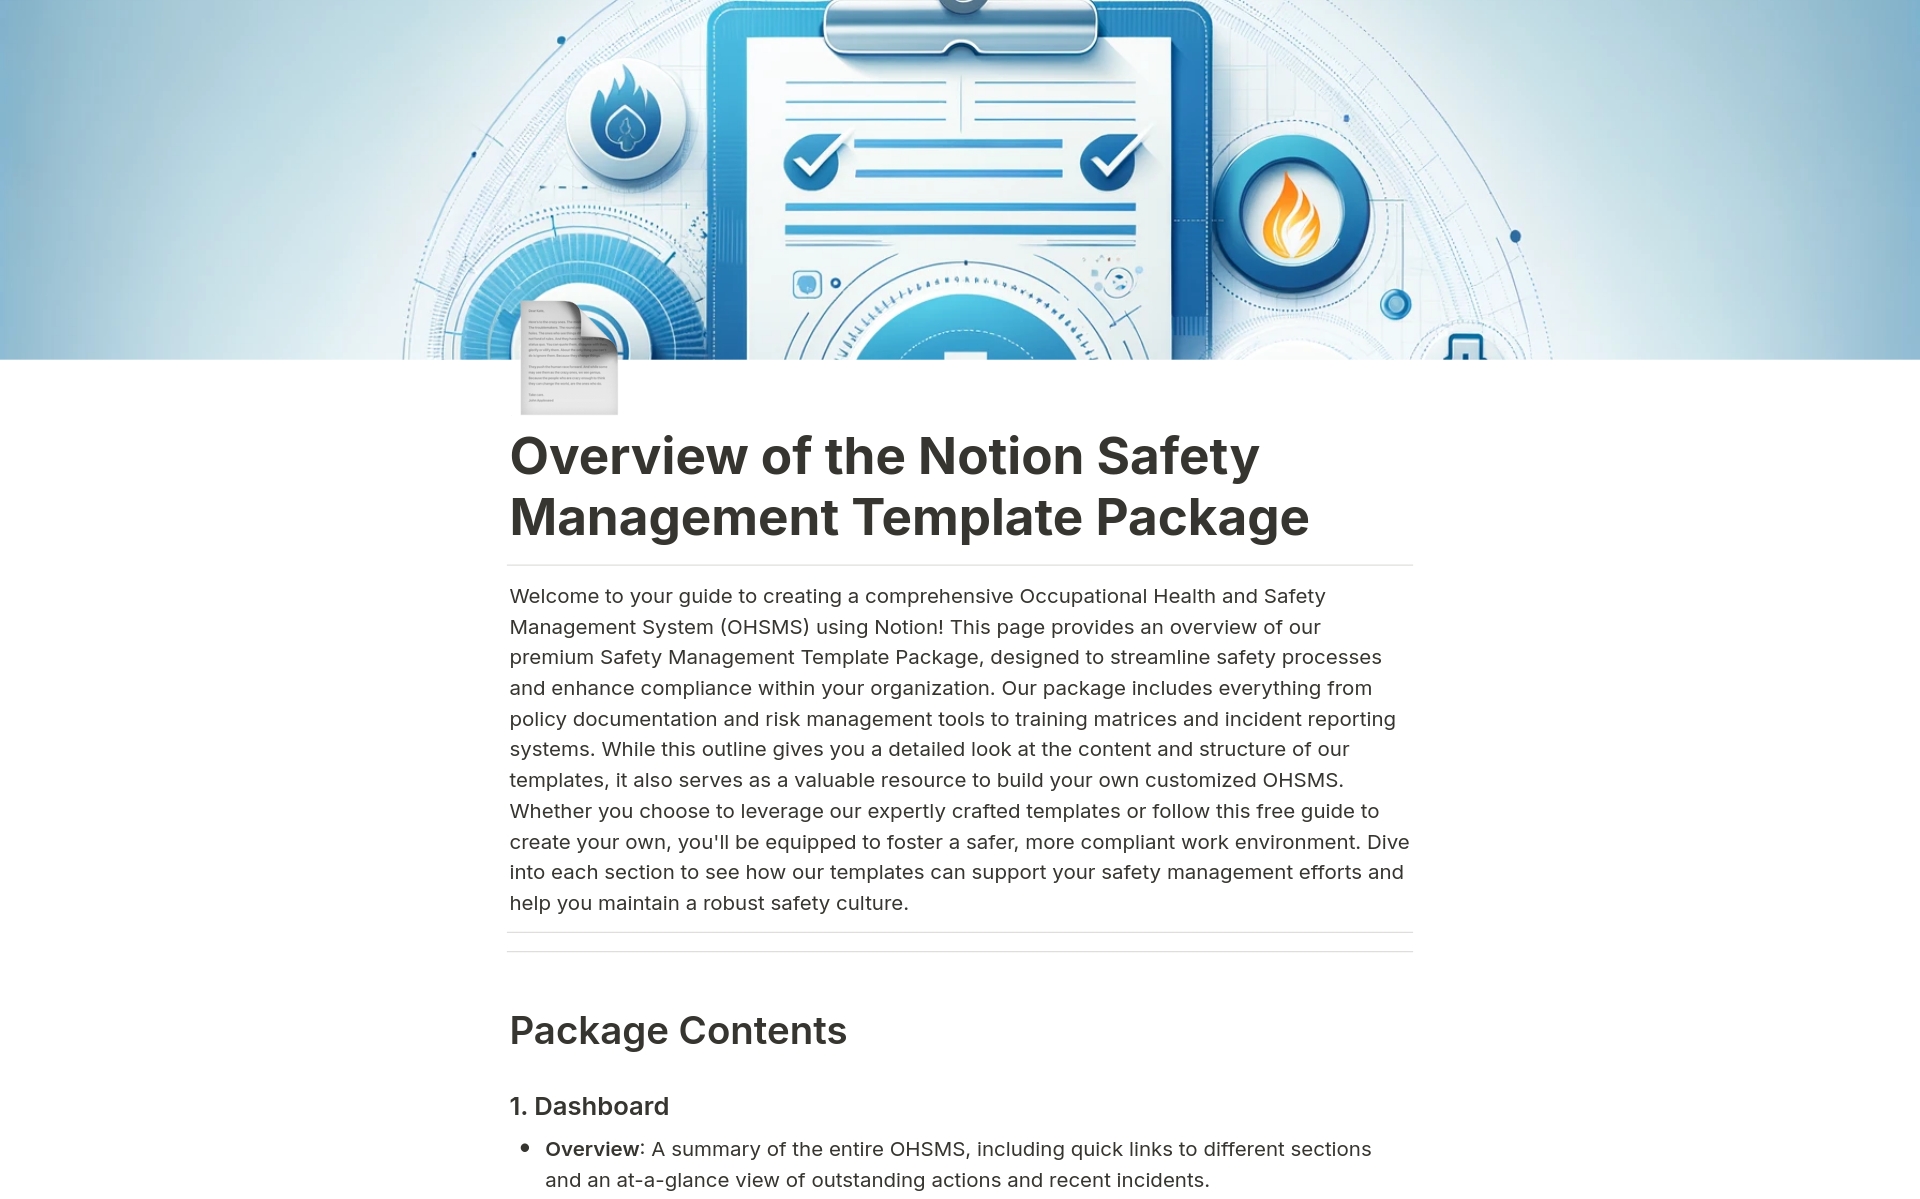 This page provides an overview of our premium Safety Management Template Package, designed to streamline safety processes and enhance compliance within your organization. 